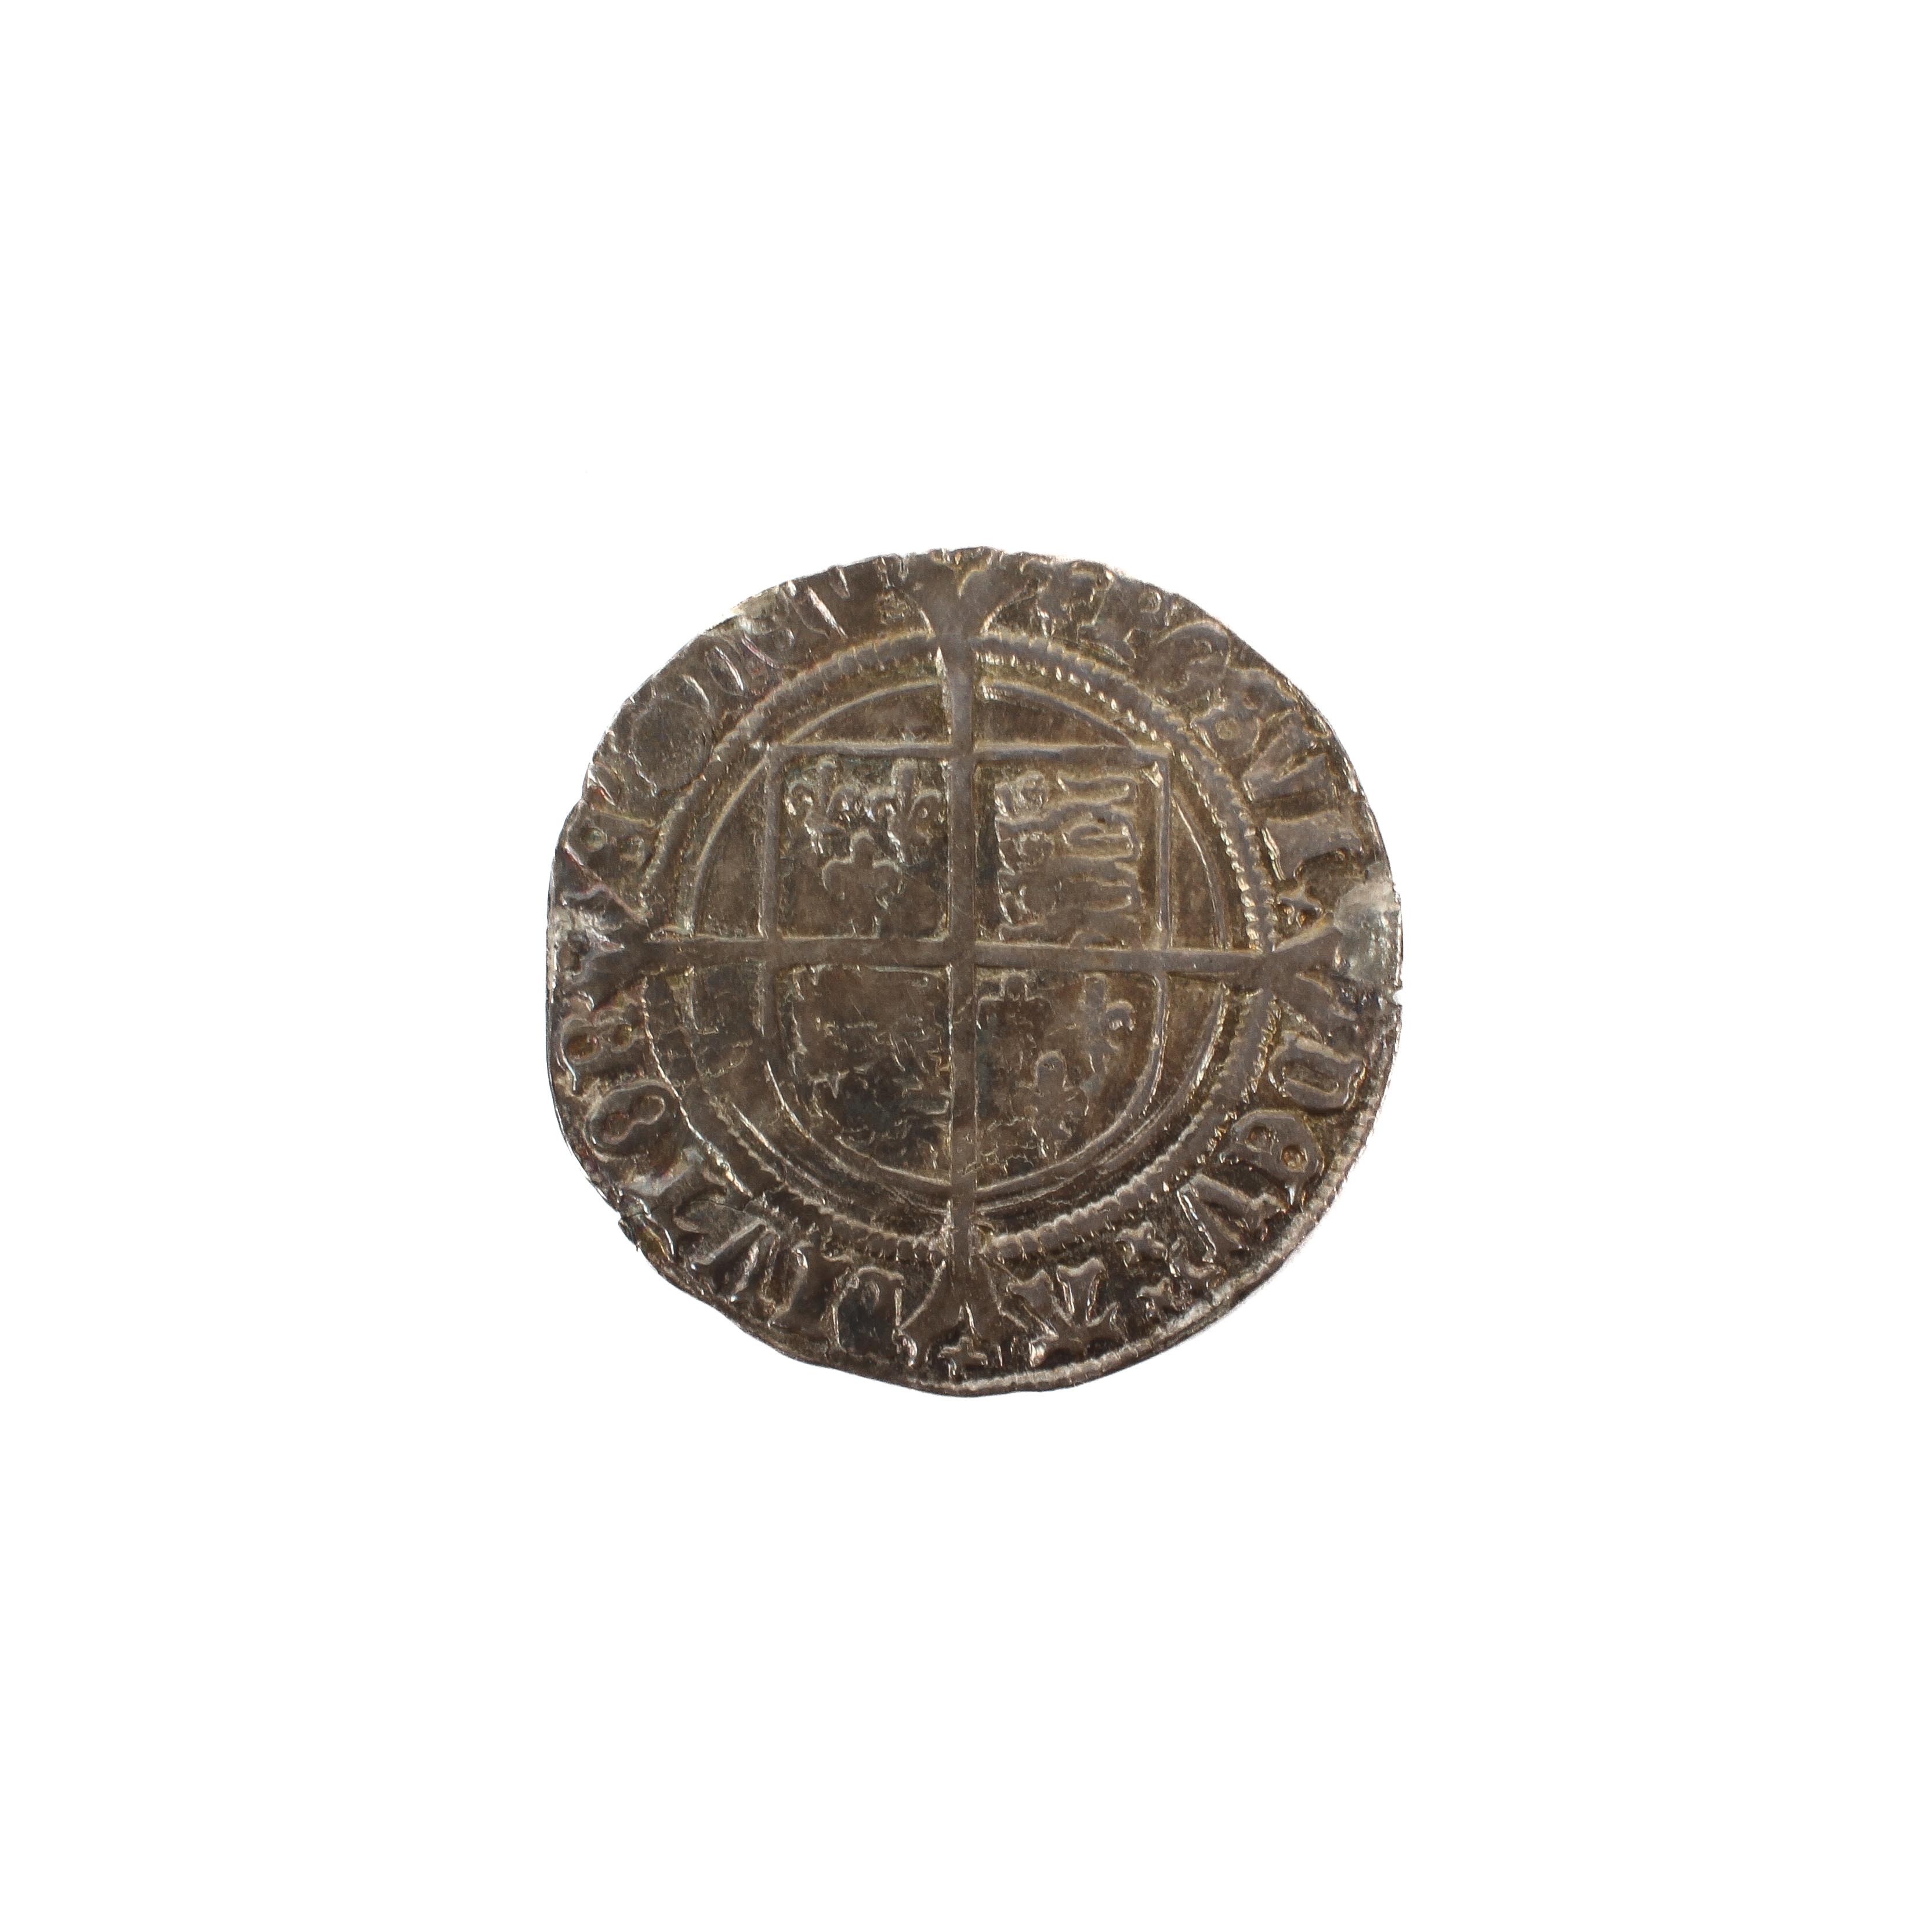 A Henry VIII groat coin. - Image 2 of 2